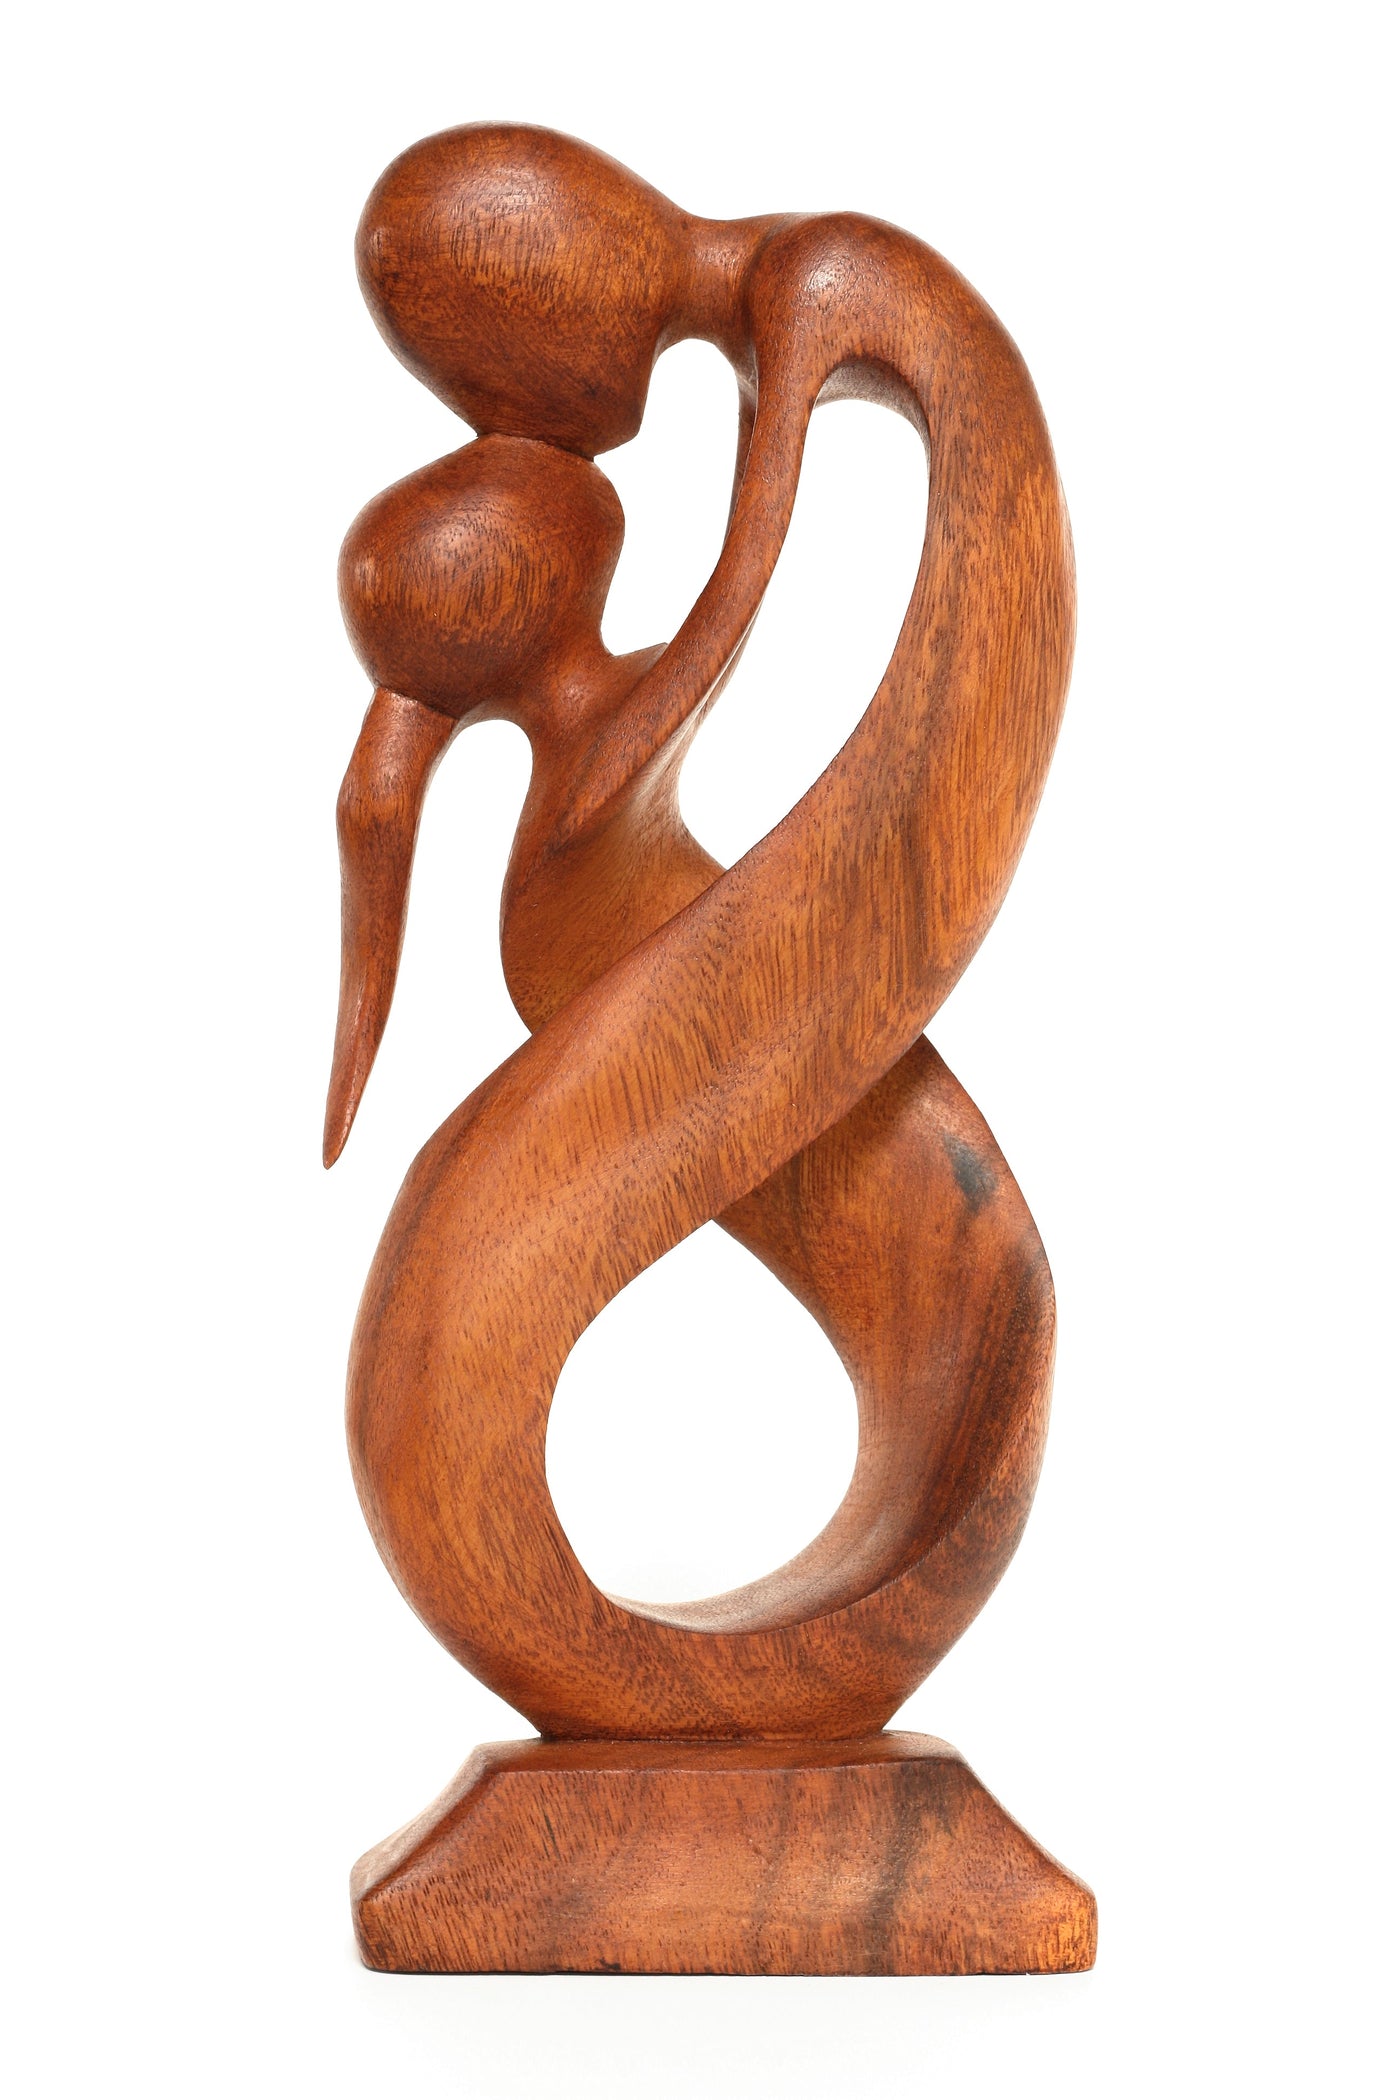 12" Wooden Handmade Abstract Sculpture Statue Handcrafted "Always Yours" Gift Art Decorative Home Decor Figurine Accent Decoration Artwork Hand Carved